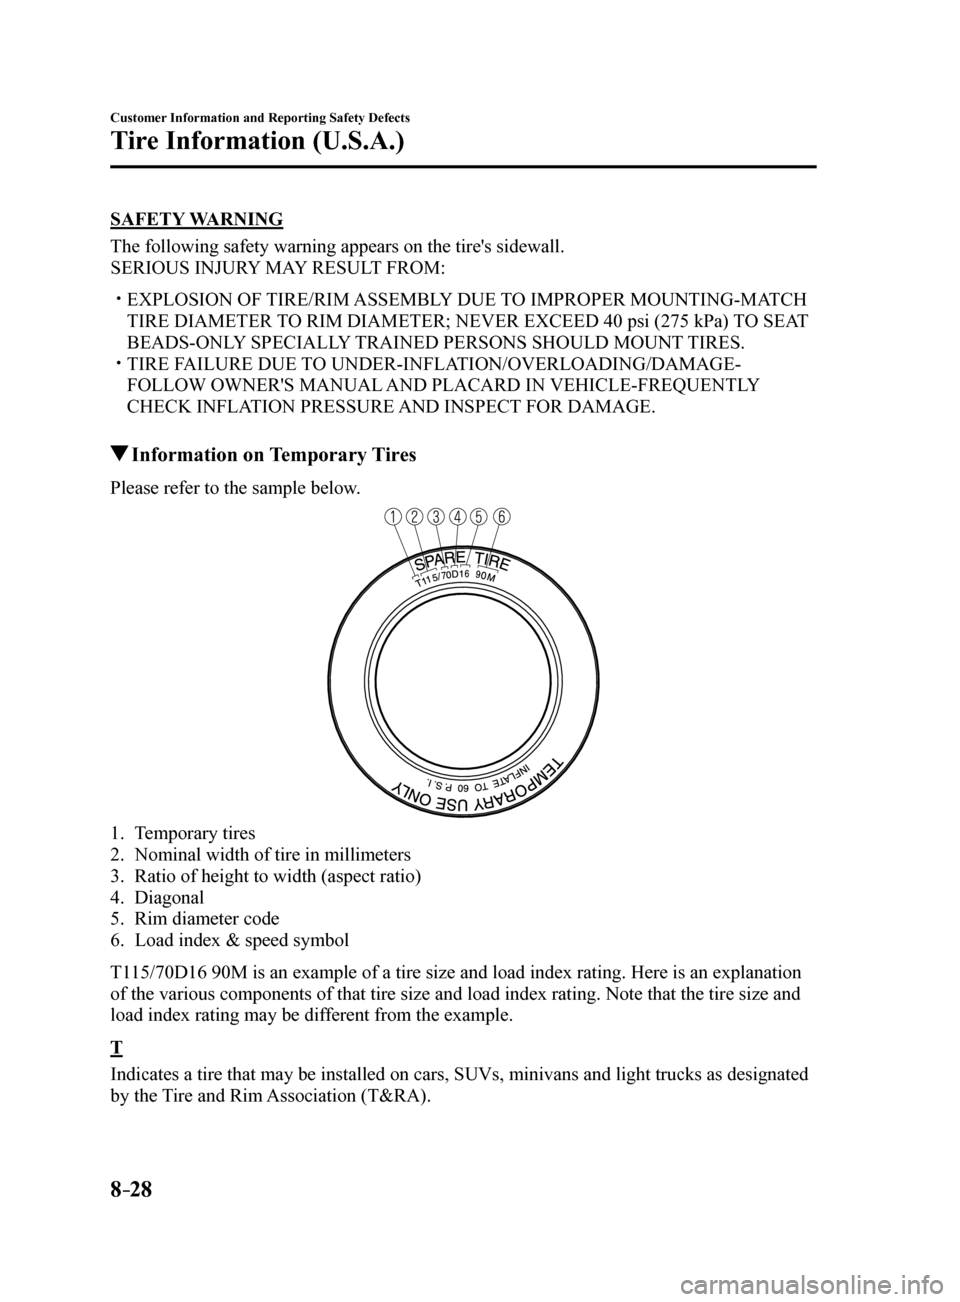 MAZDA MODEL 6 2017   (in English) User Guide 8–28
Customer Information and Reporting Safety Defects
Tire Information (U.S.A.)
SAFETY WARNING
The following safety warning appears on the tires sidewall.
SERIOUS INJURY MAY RESULT FROM:
 EXPLO